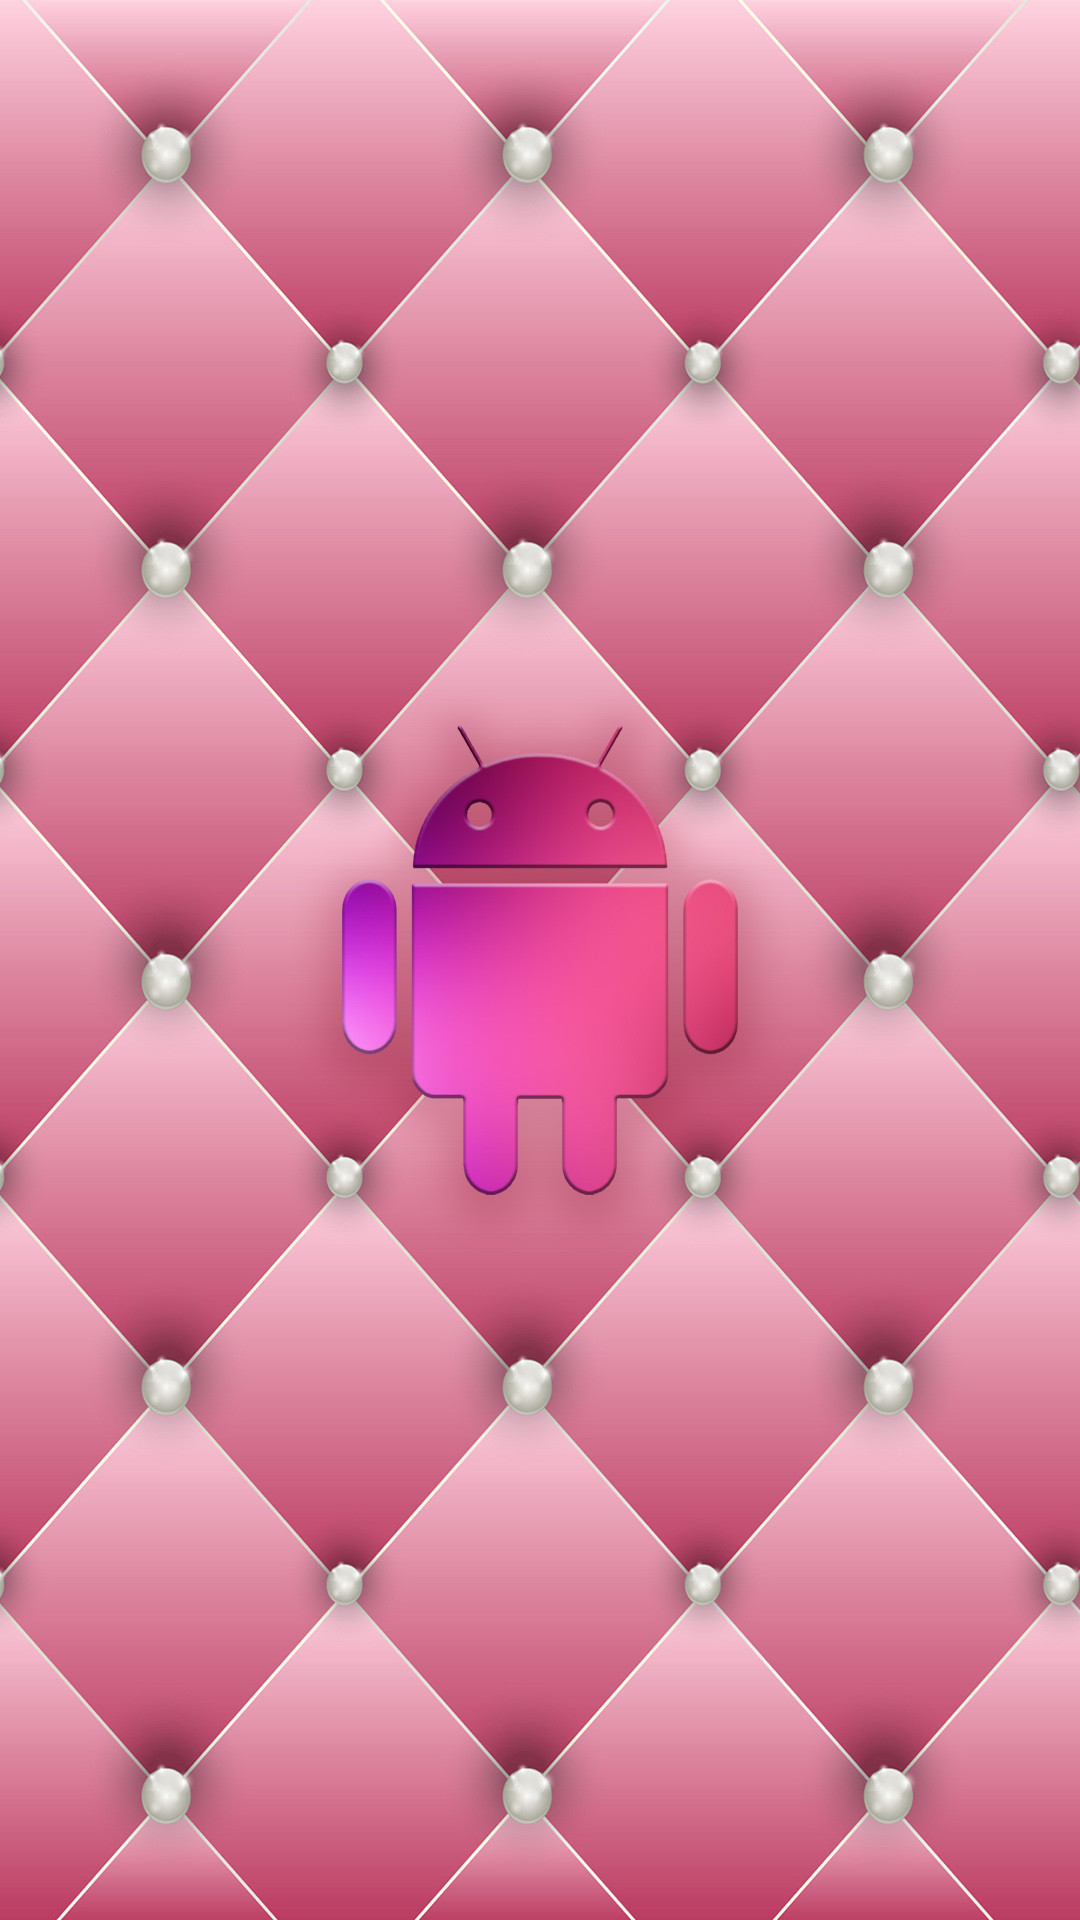 1080x1920 Download the Android Expensive Pink Diamonds wallpaper